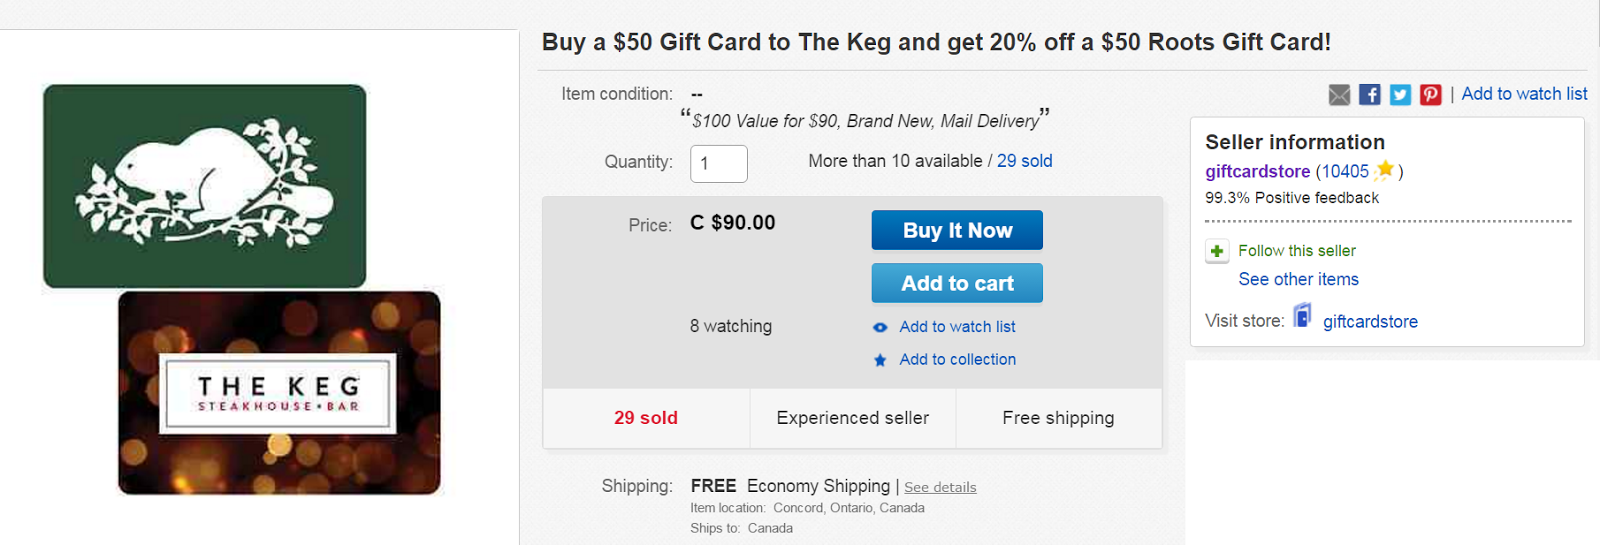 eBay: Buy a $50 the KEG Gift Card and Get 20% off a $50 Roots Gift Card